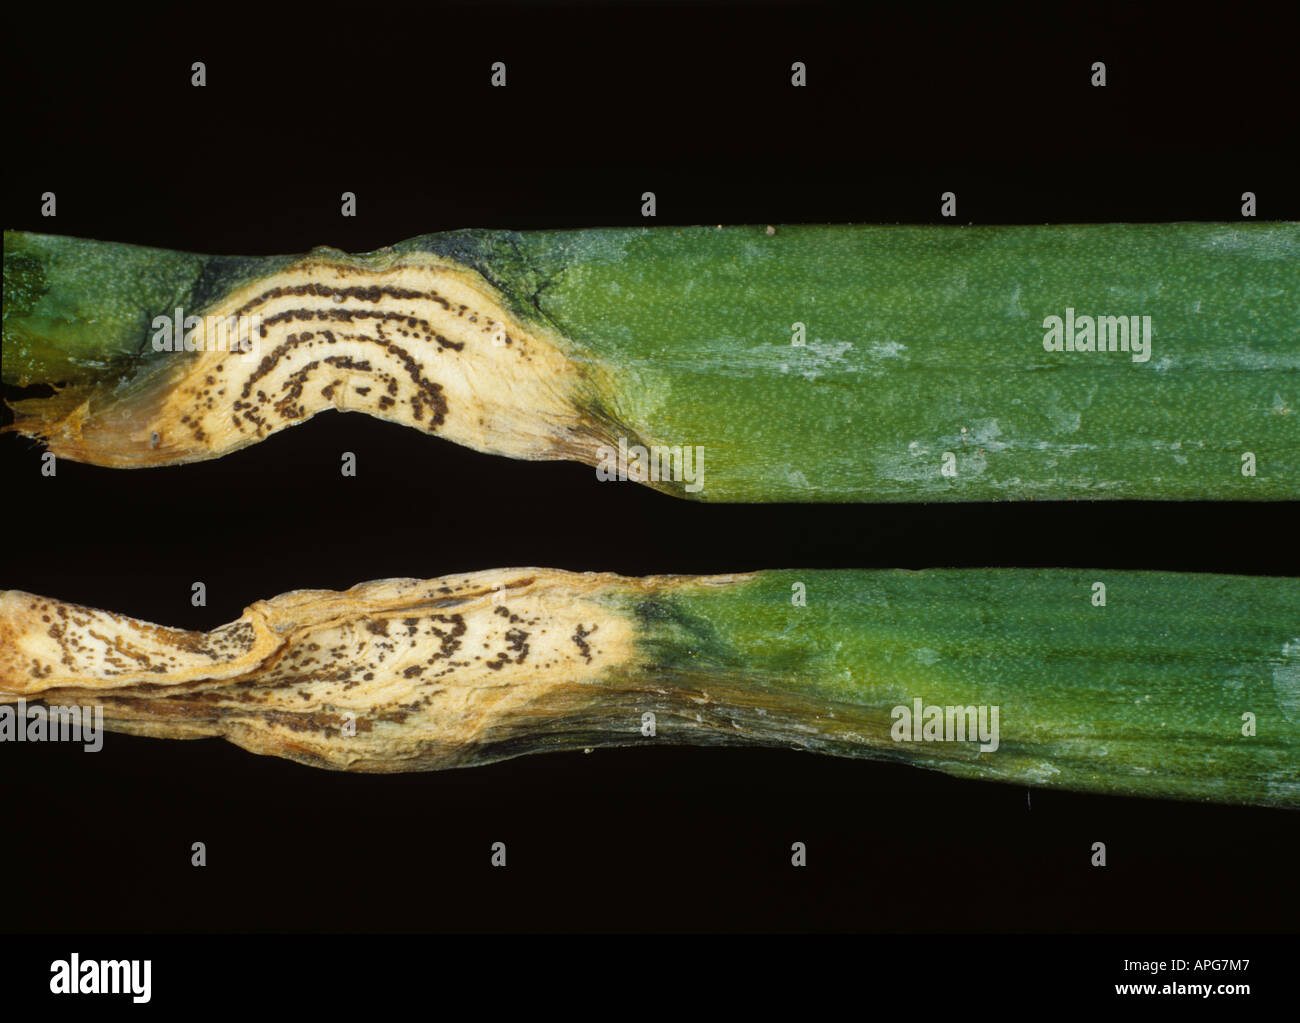 Anthracnose Colletotrichum spp lesion with concentric rings of pycnidia on Chinese chives leaf Stock Photo